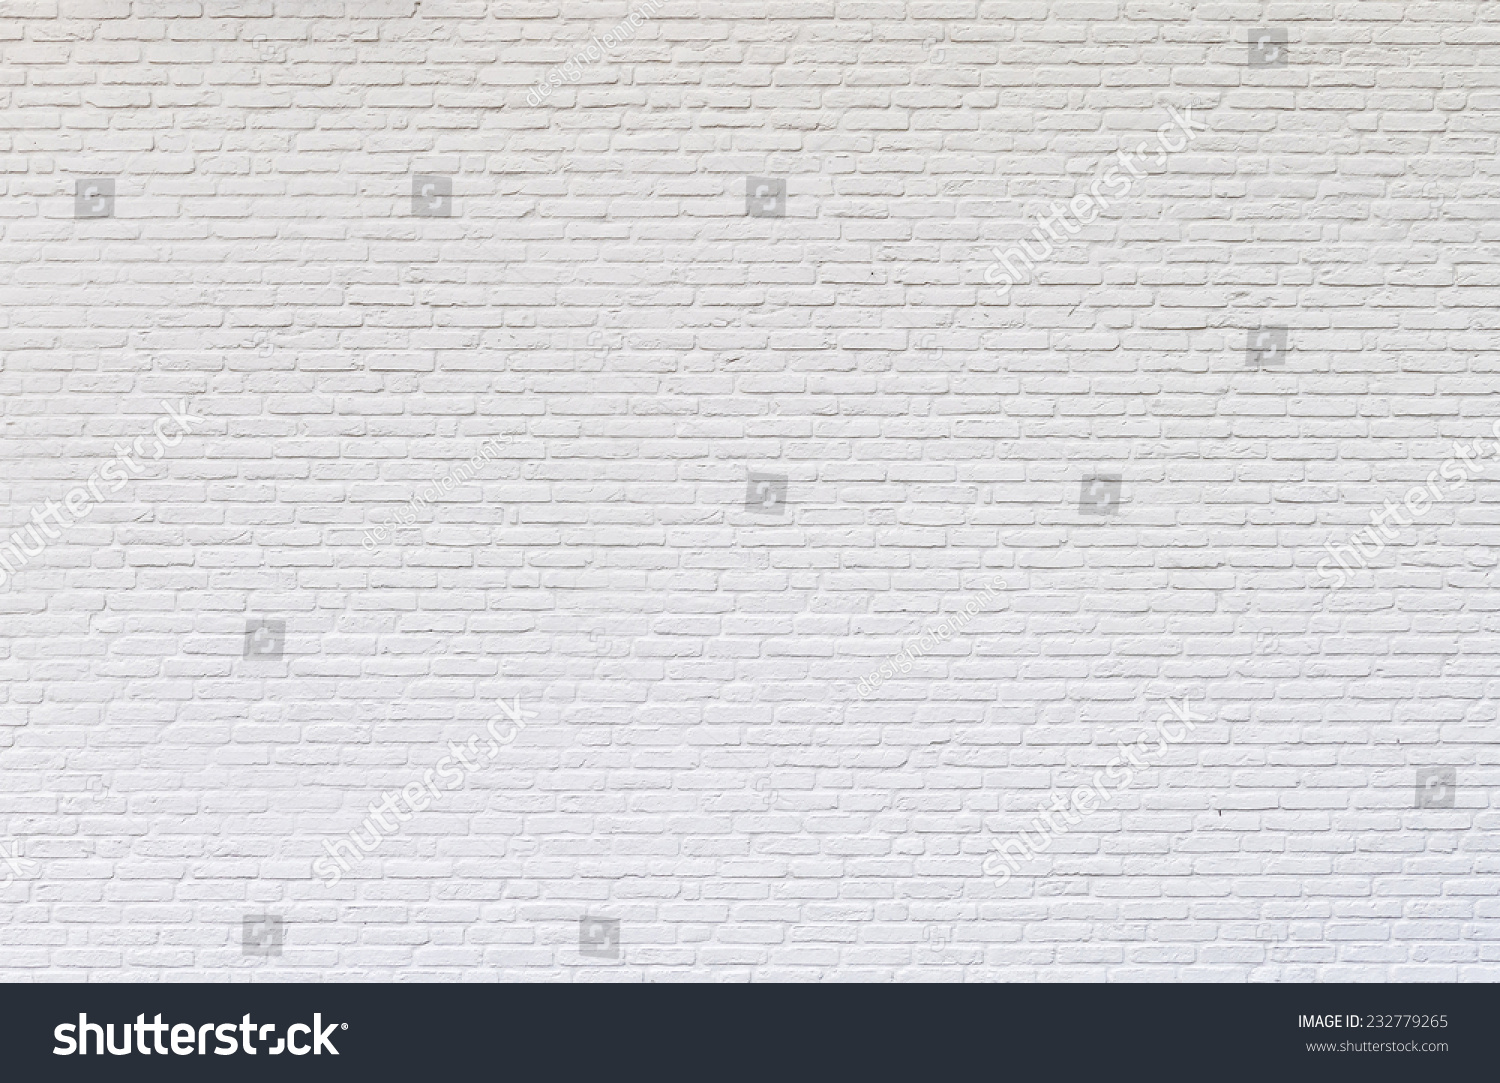 White brick wall for texture or background #232779265